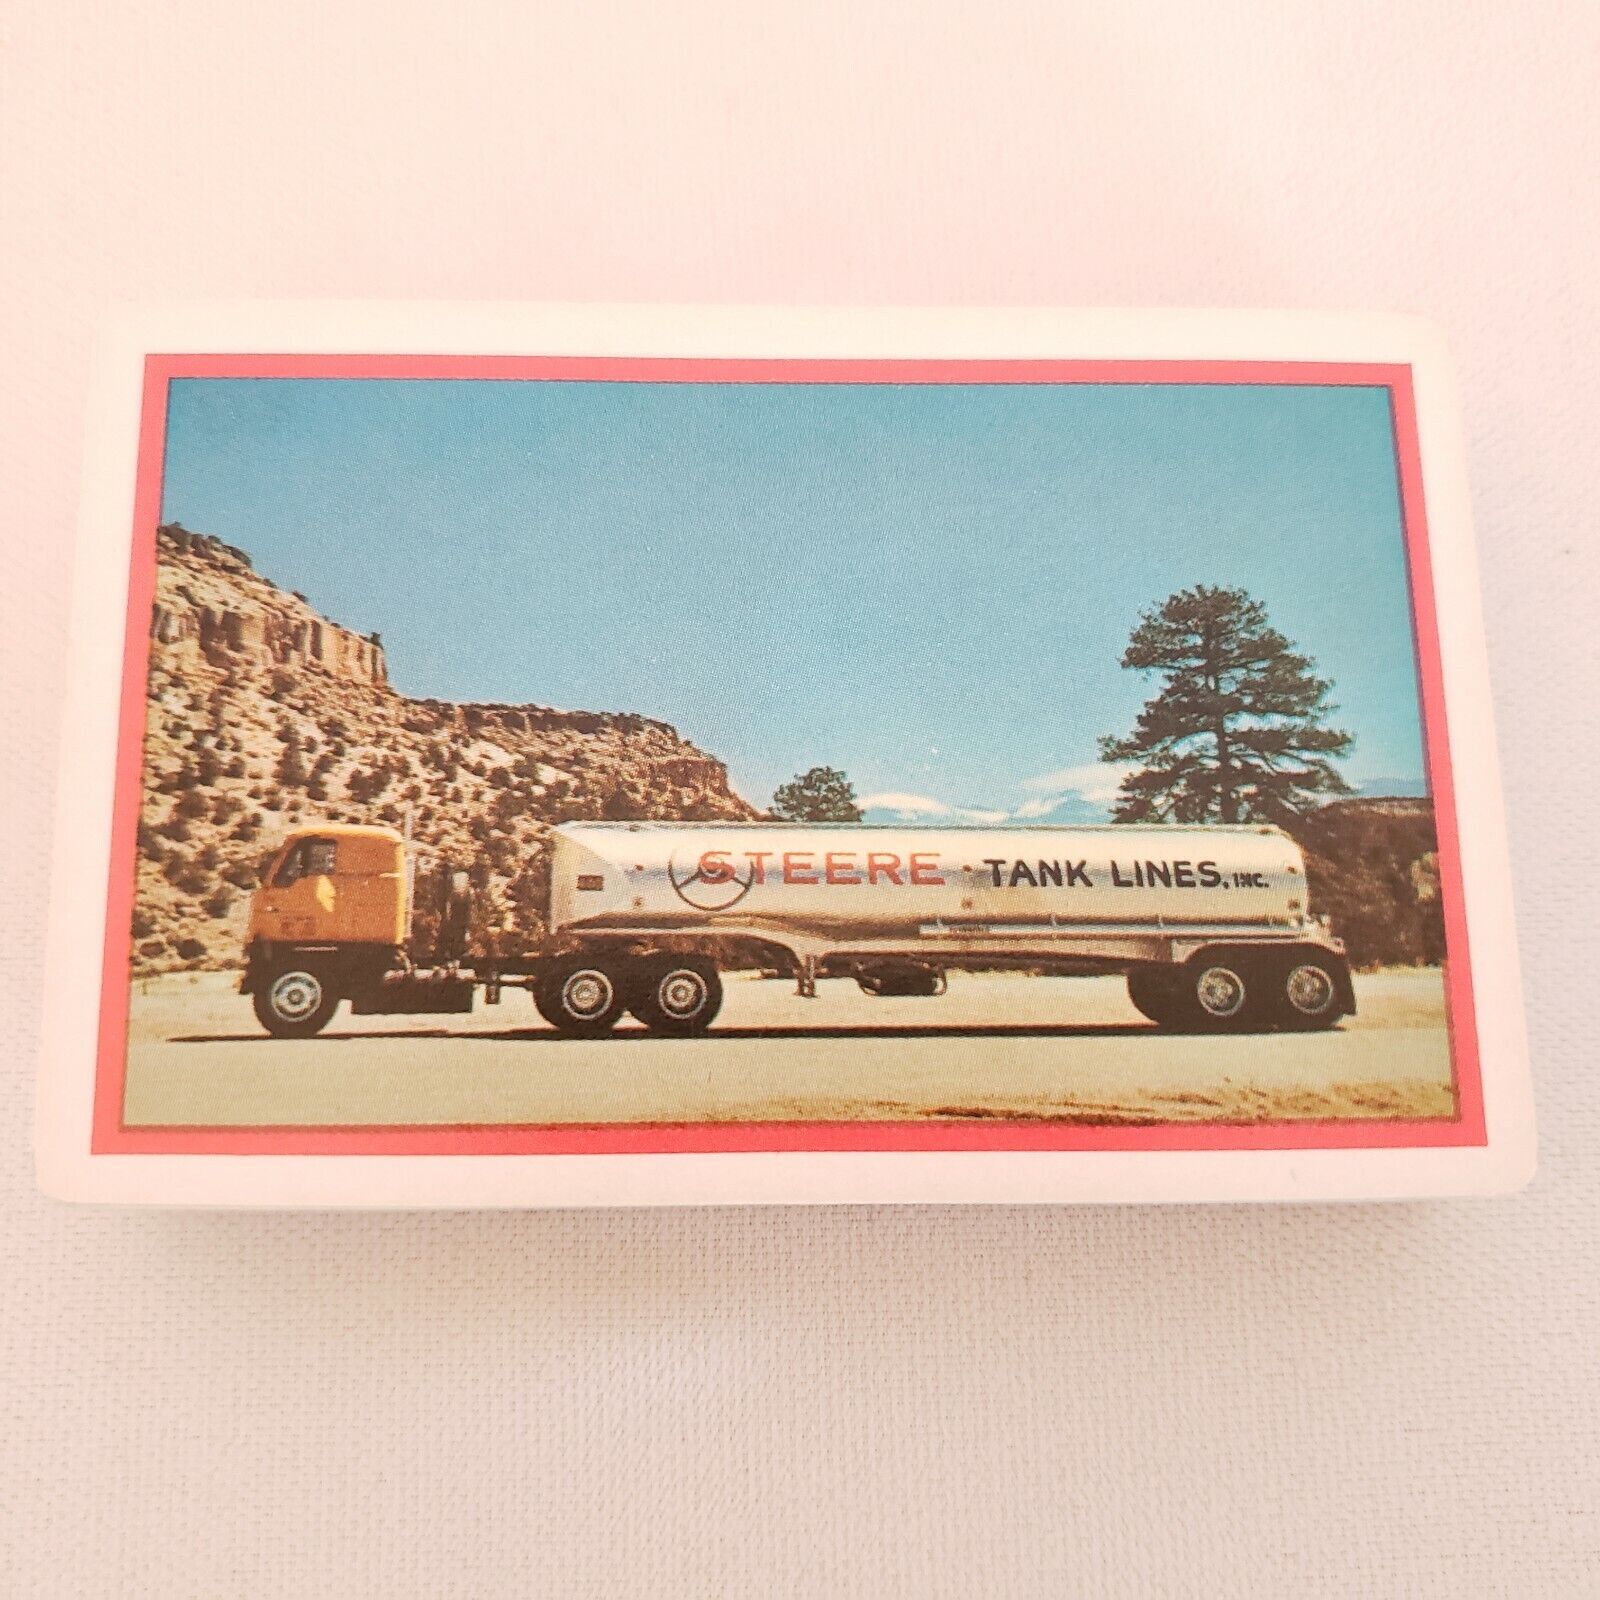 Vintage 60s Steere Tank Lines Truck Company Advertising Playing Cards Whole Deck